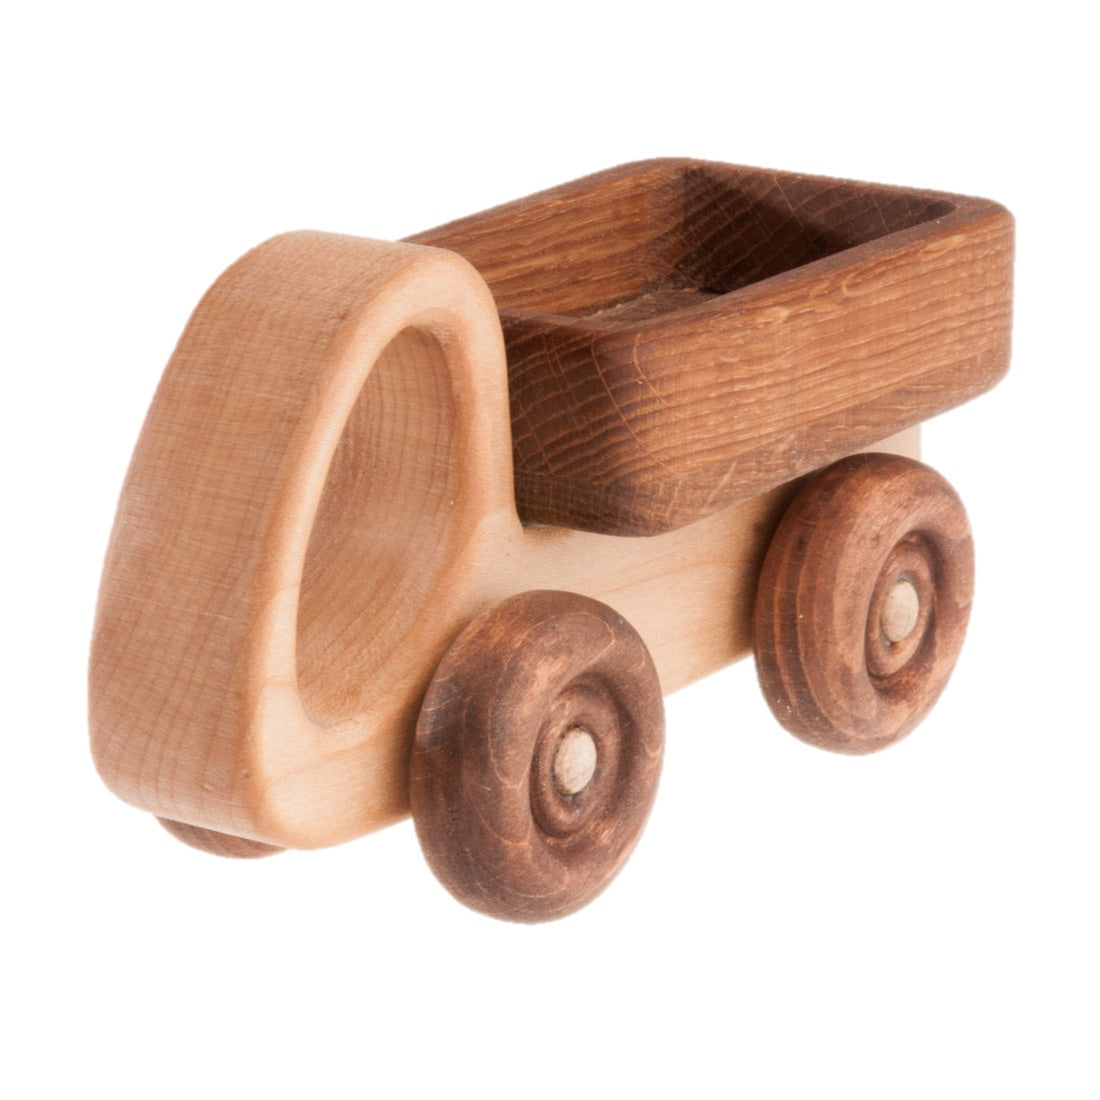 wooden toy truck front